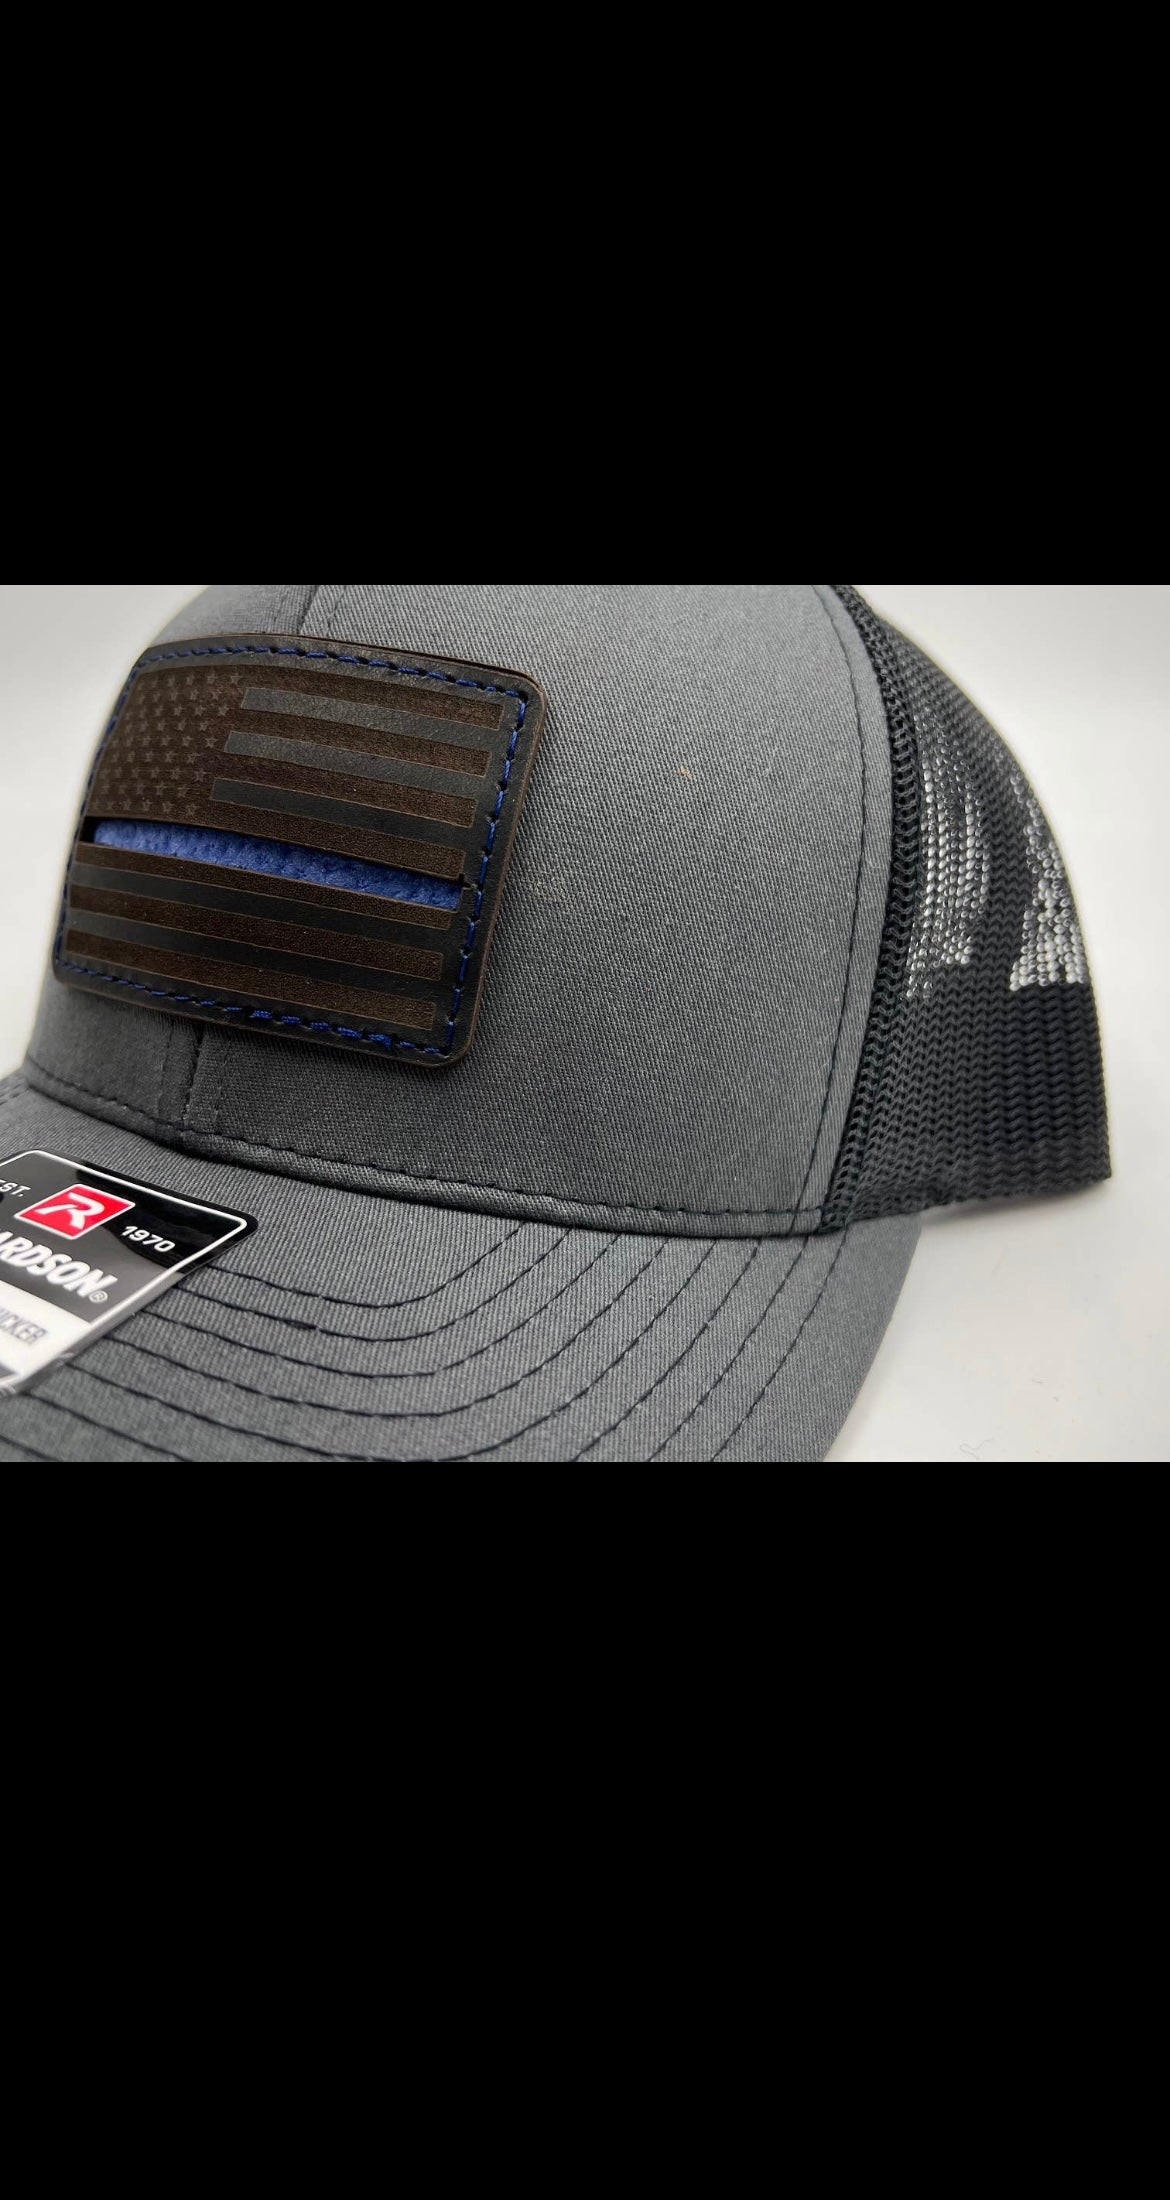 Thin Blue Line Leather Patch Hat